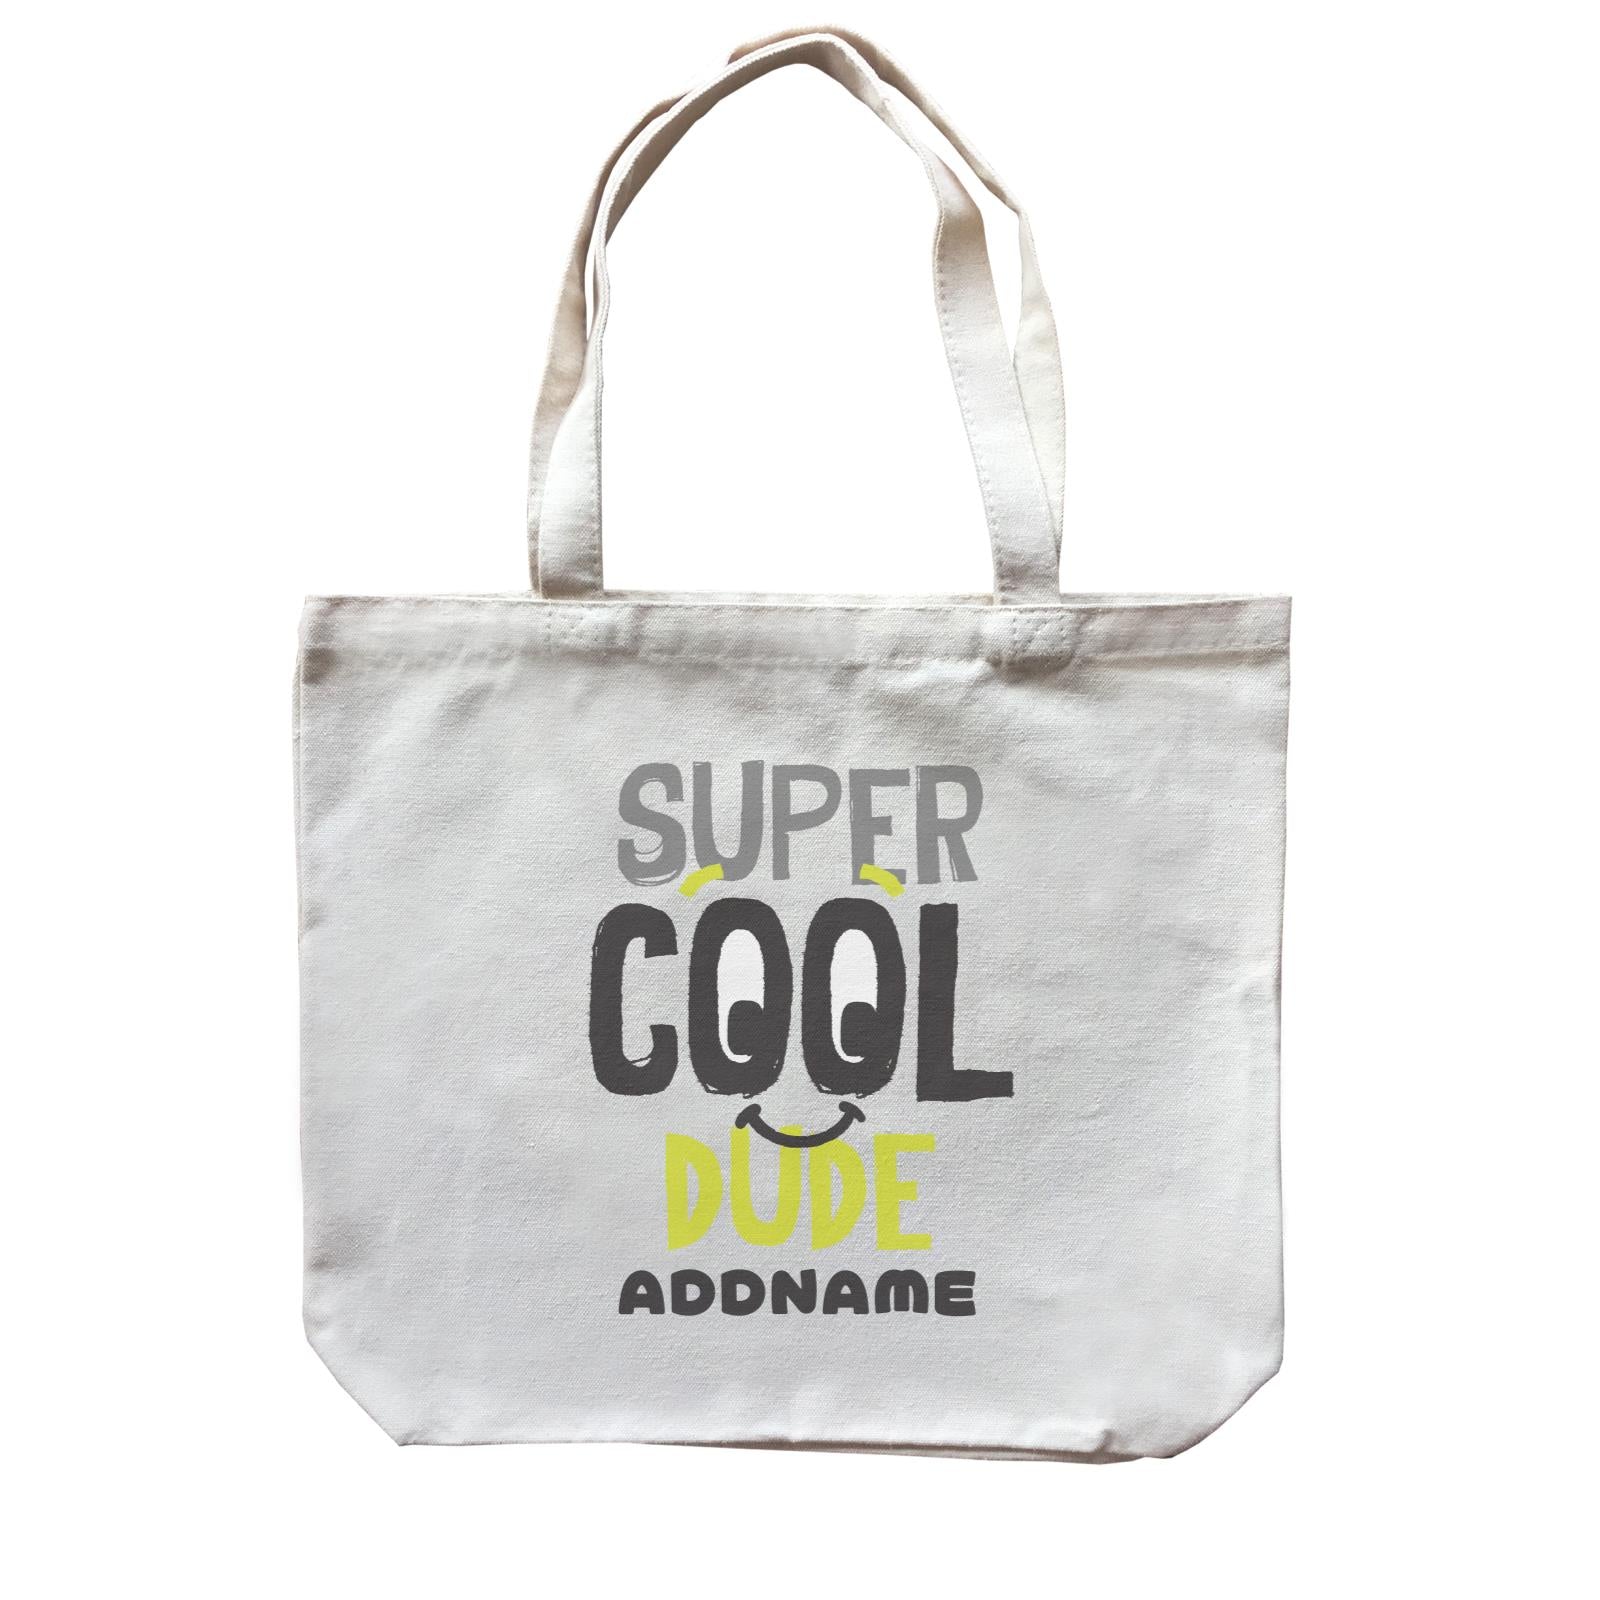 Super Cool Dude with Smiley Addname Canvas Bag